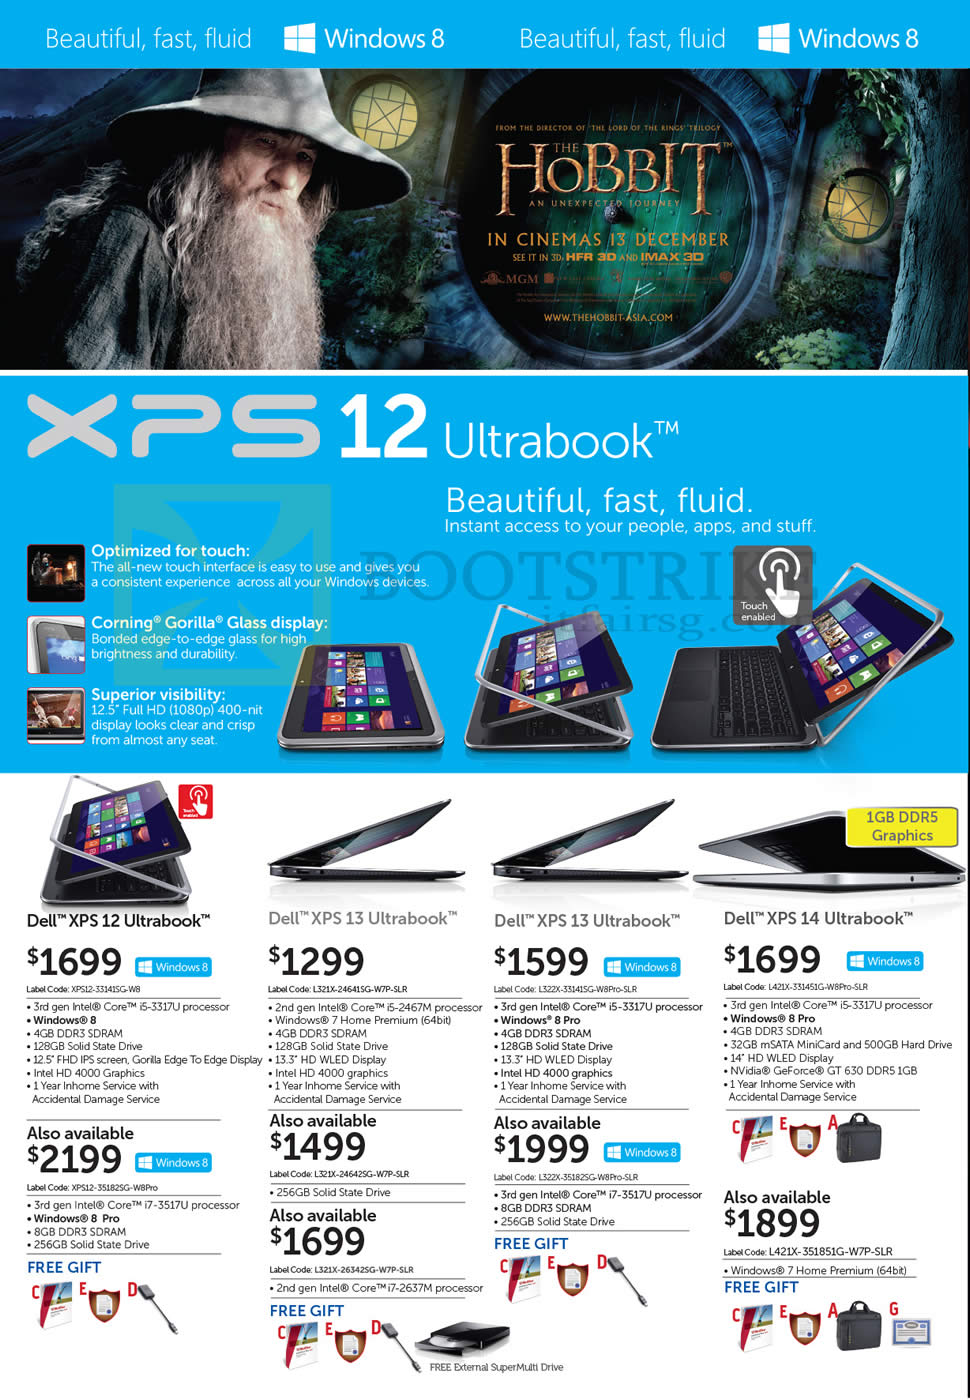 SITEX 2012 price list image brochure of Dell Notebooks Ultrabook XPS 12, XPS 13, XPS 14